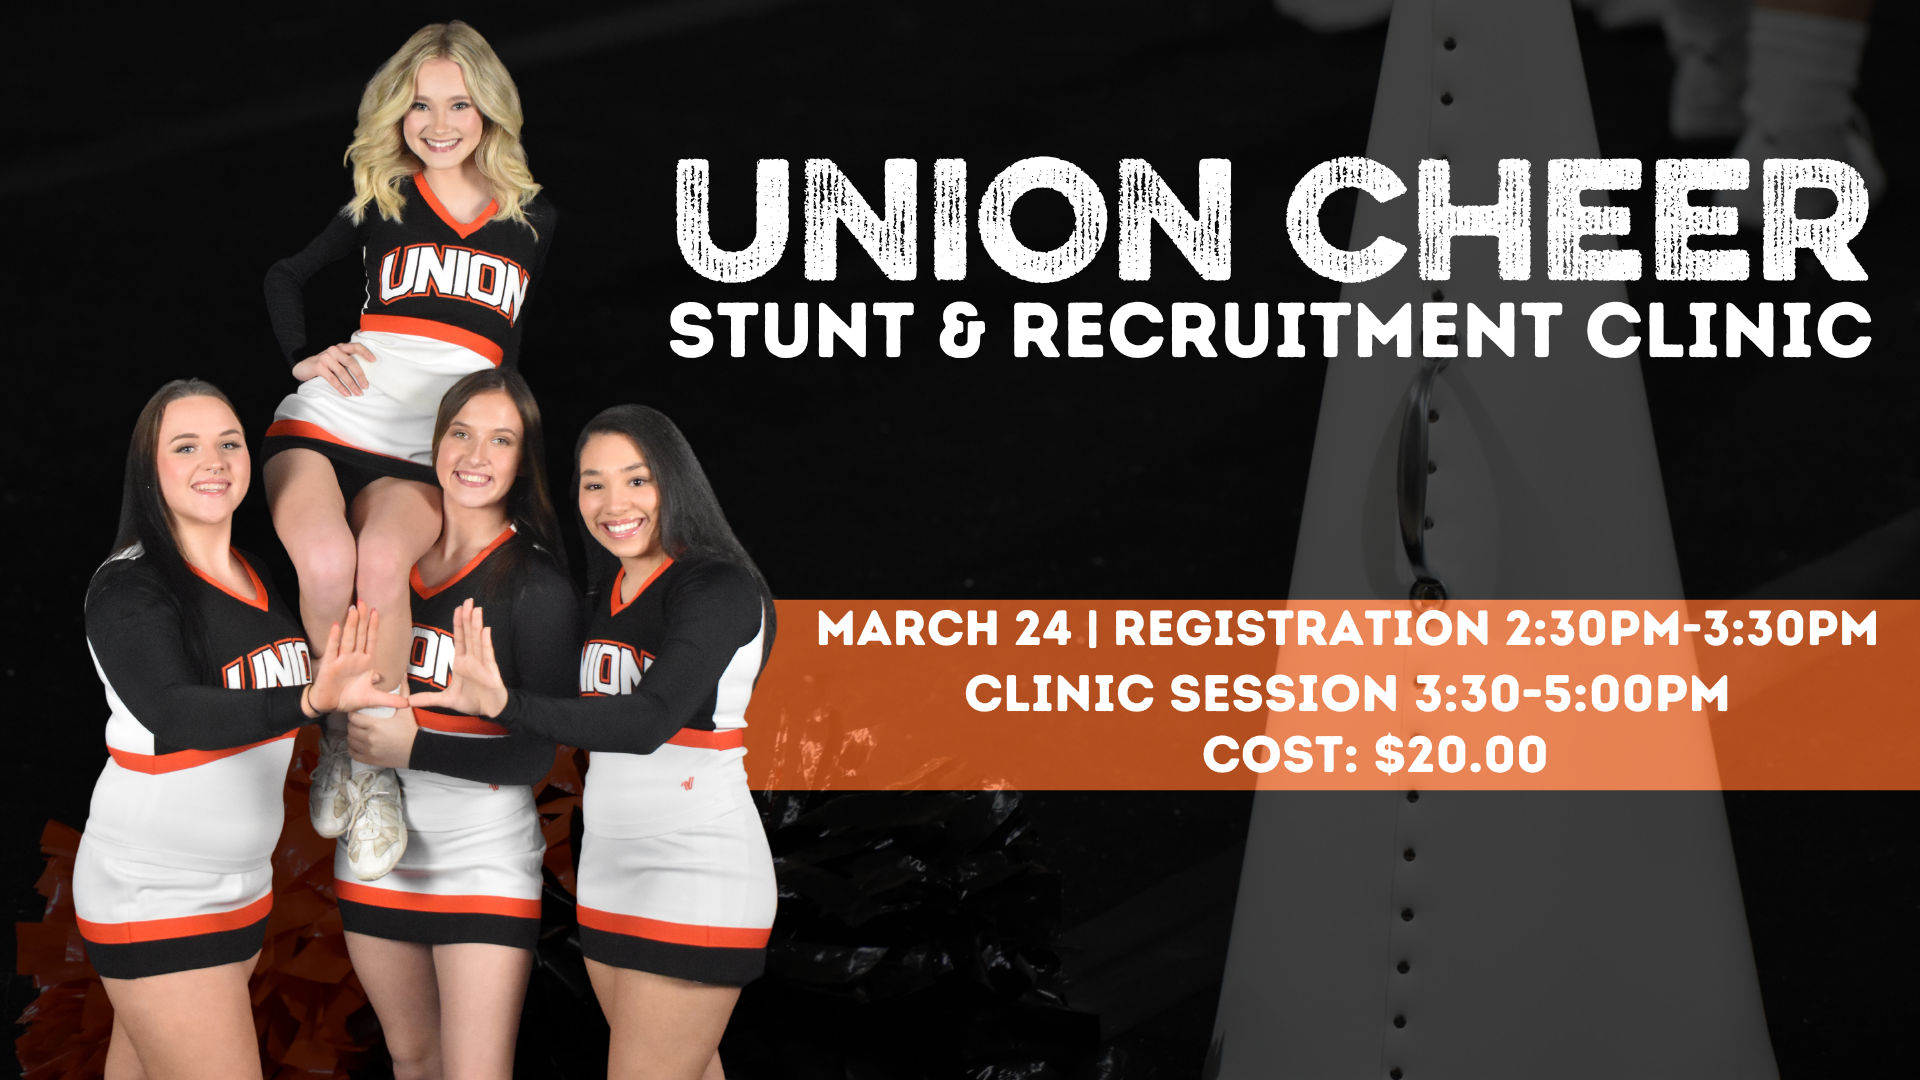 Union cheer to host a stunt and recruitment clinic on March 24